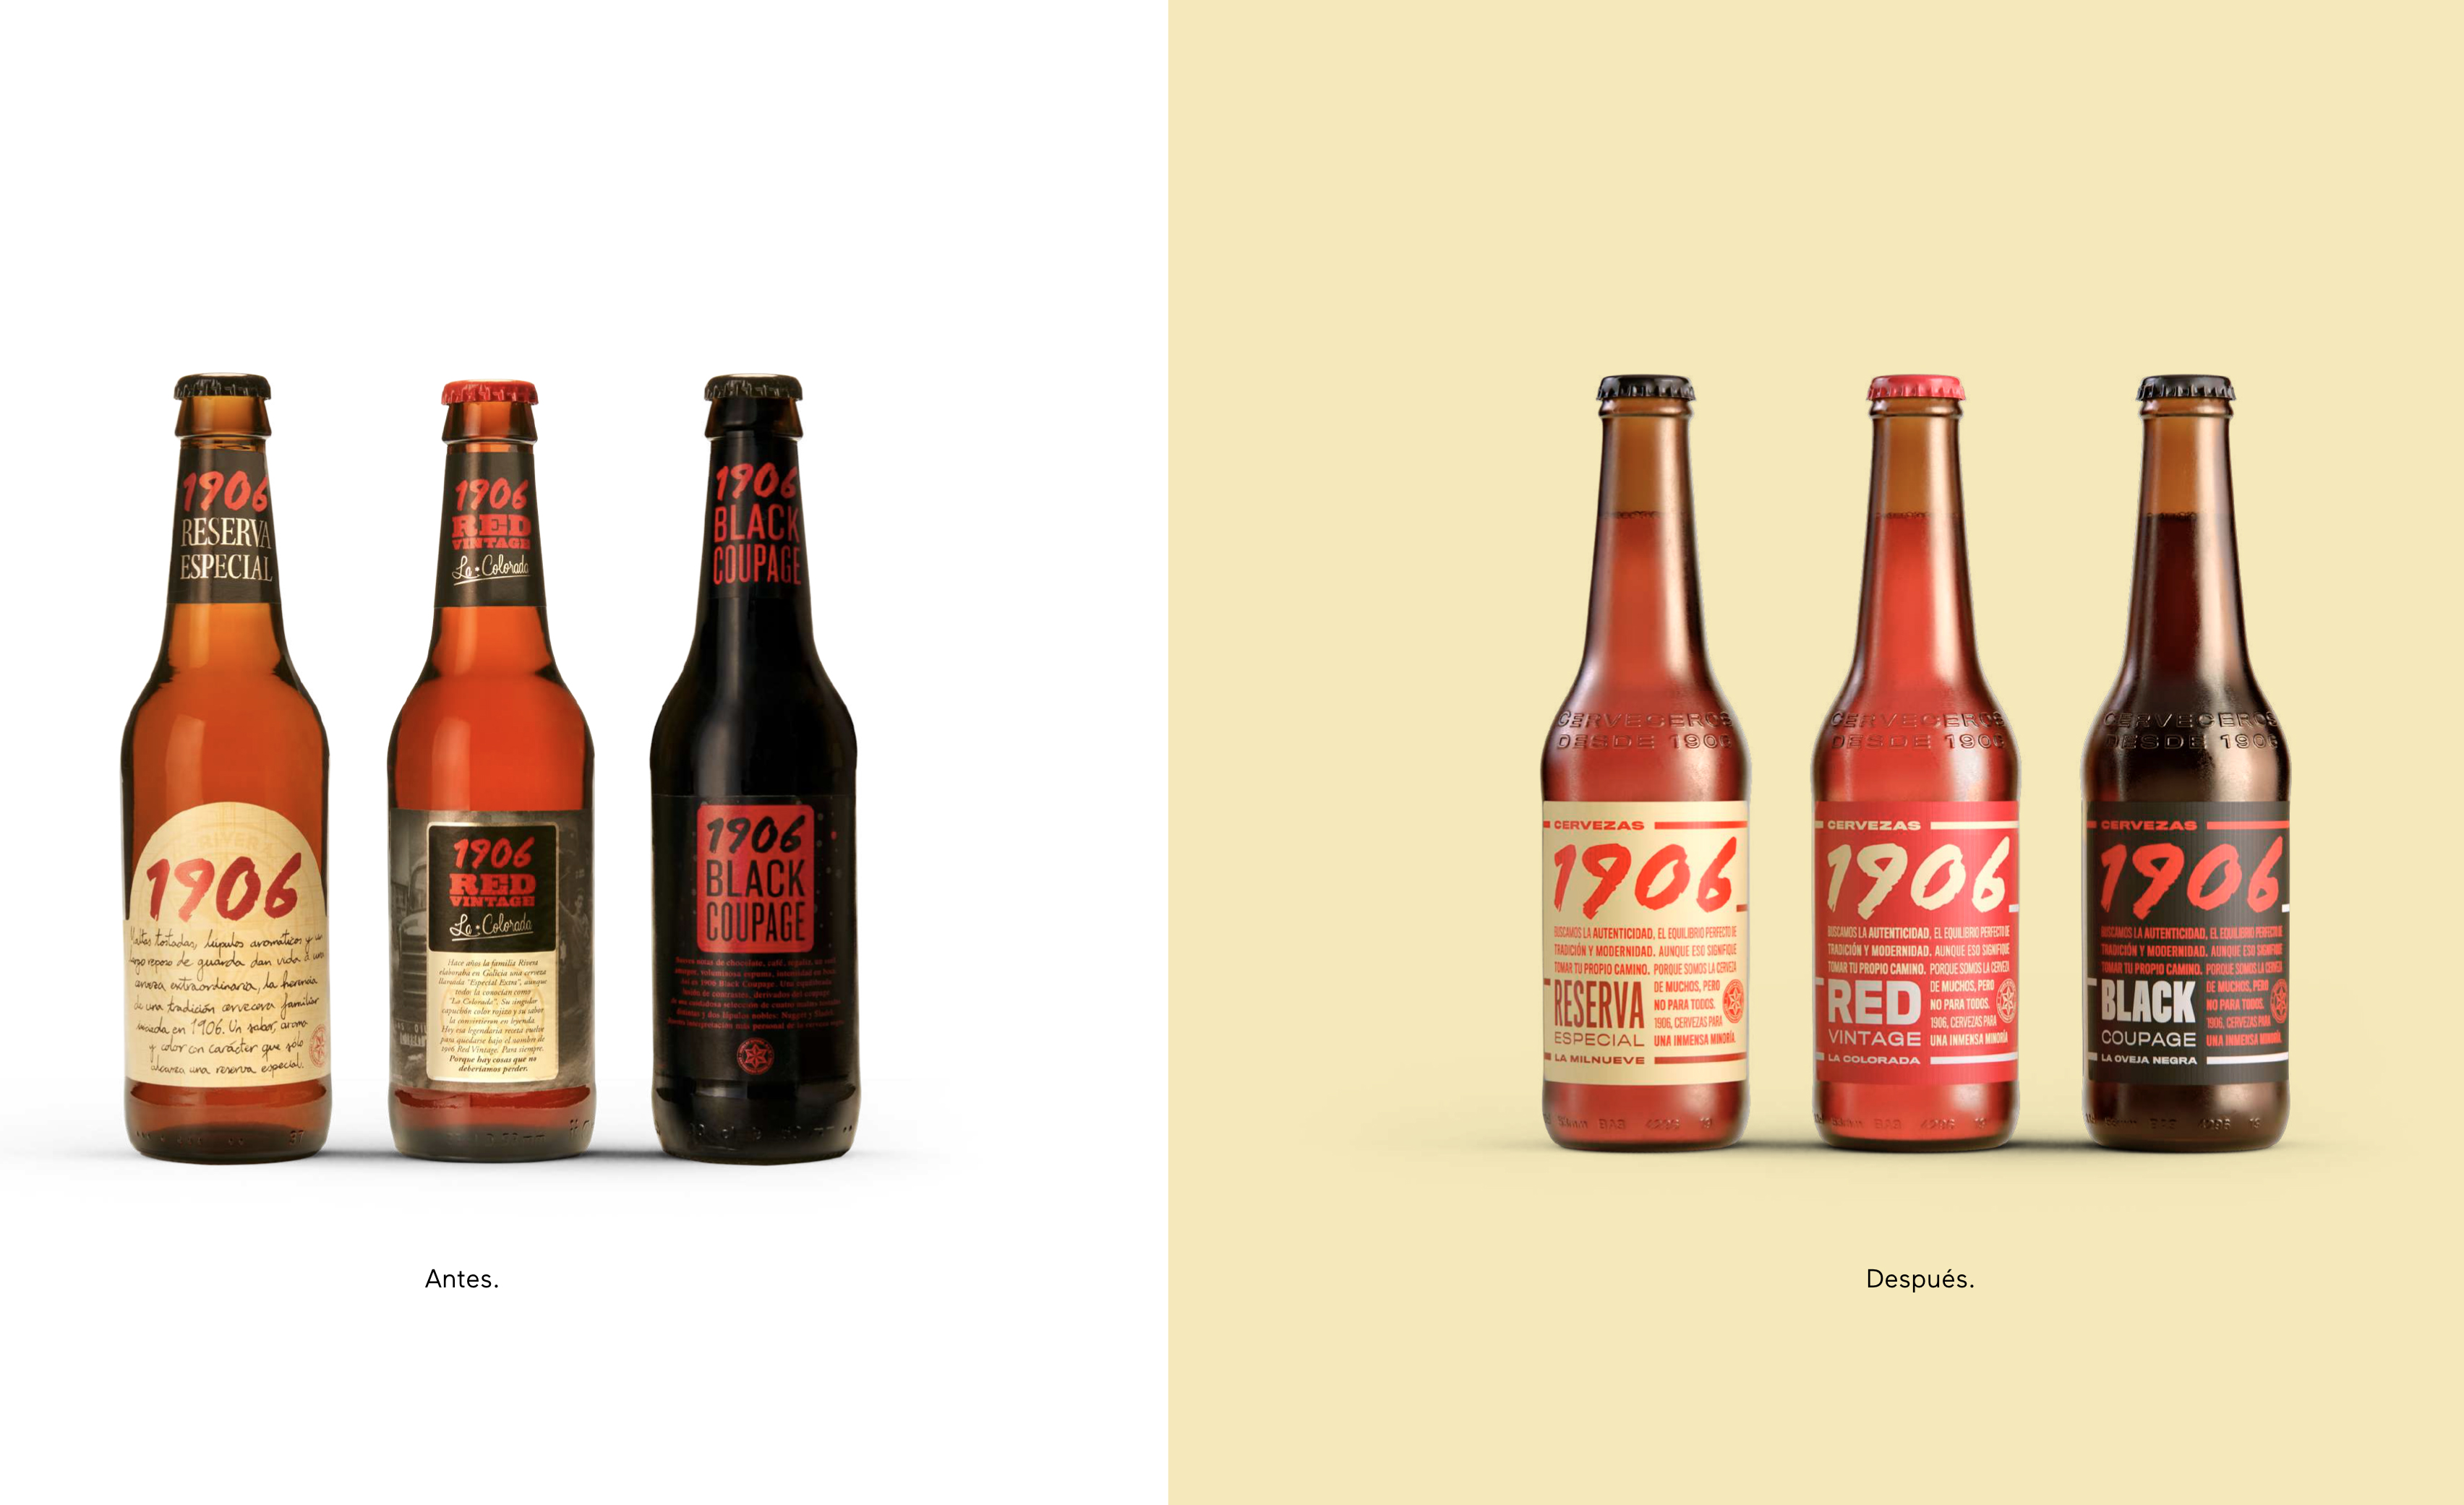 Cervezas 1906 - Full brand restyling and packaging design by Costa - Creative Work